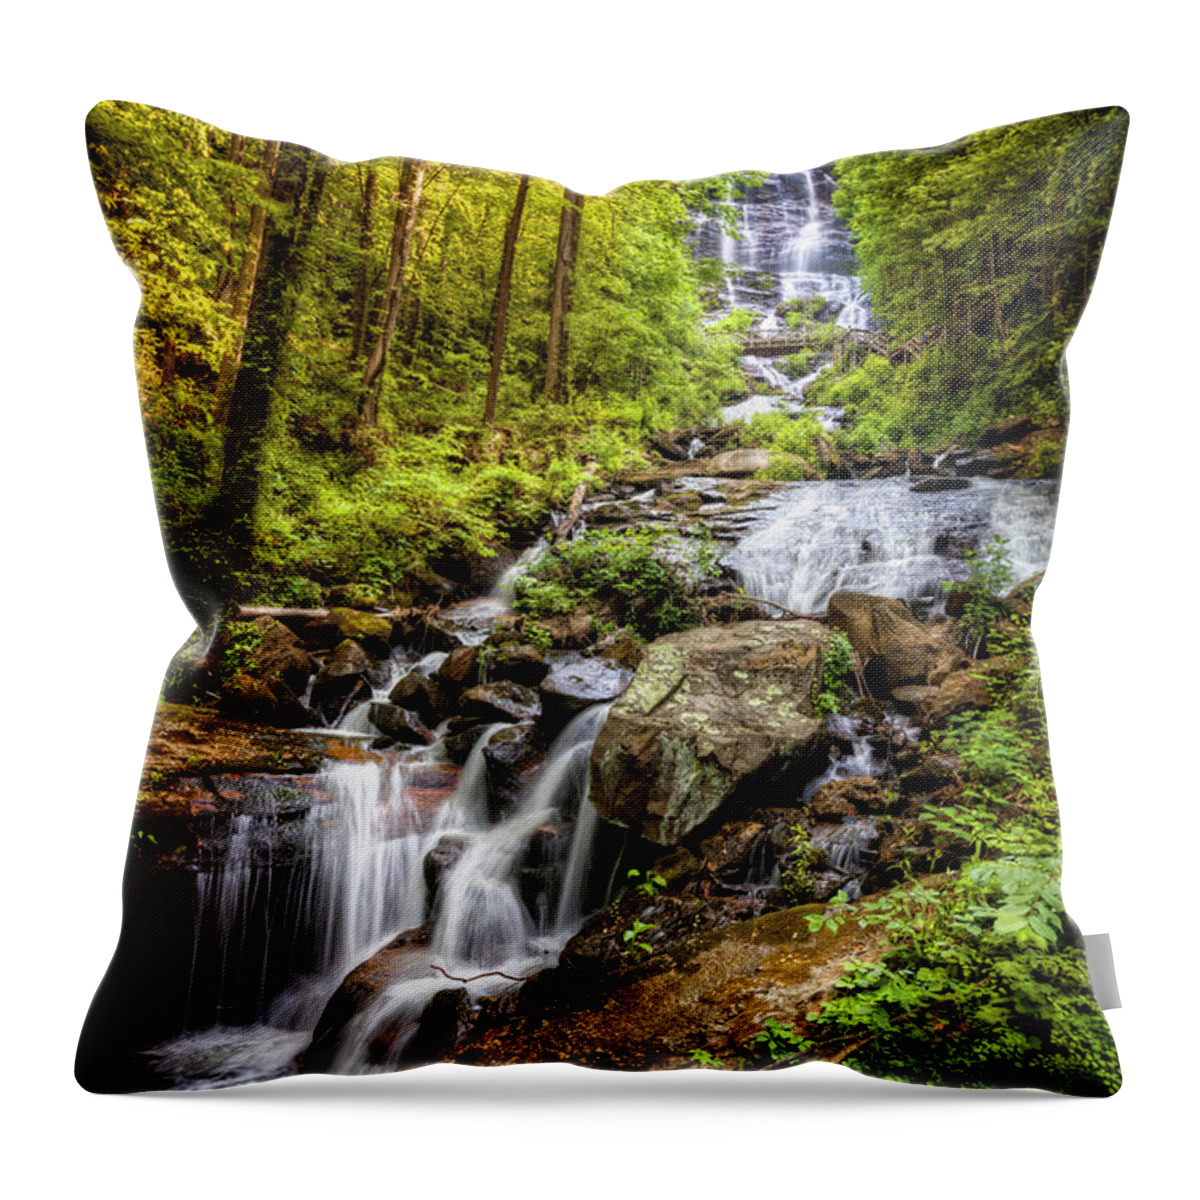 Appalachia Throw Pillow featuring the photograph Full Beauty Amicalola Falls by Debra and Dave Vanderlaan